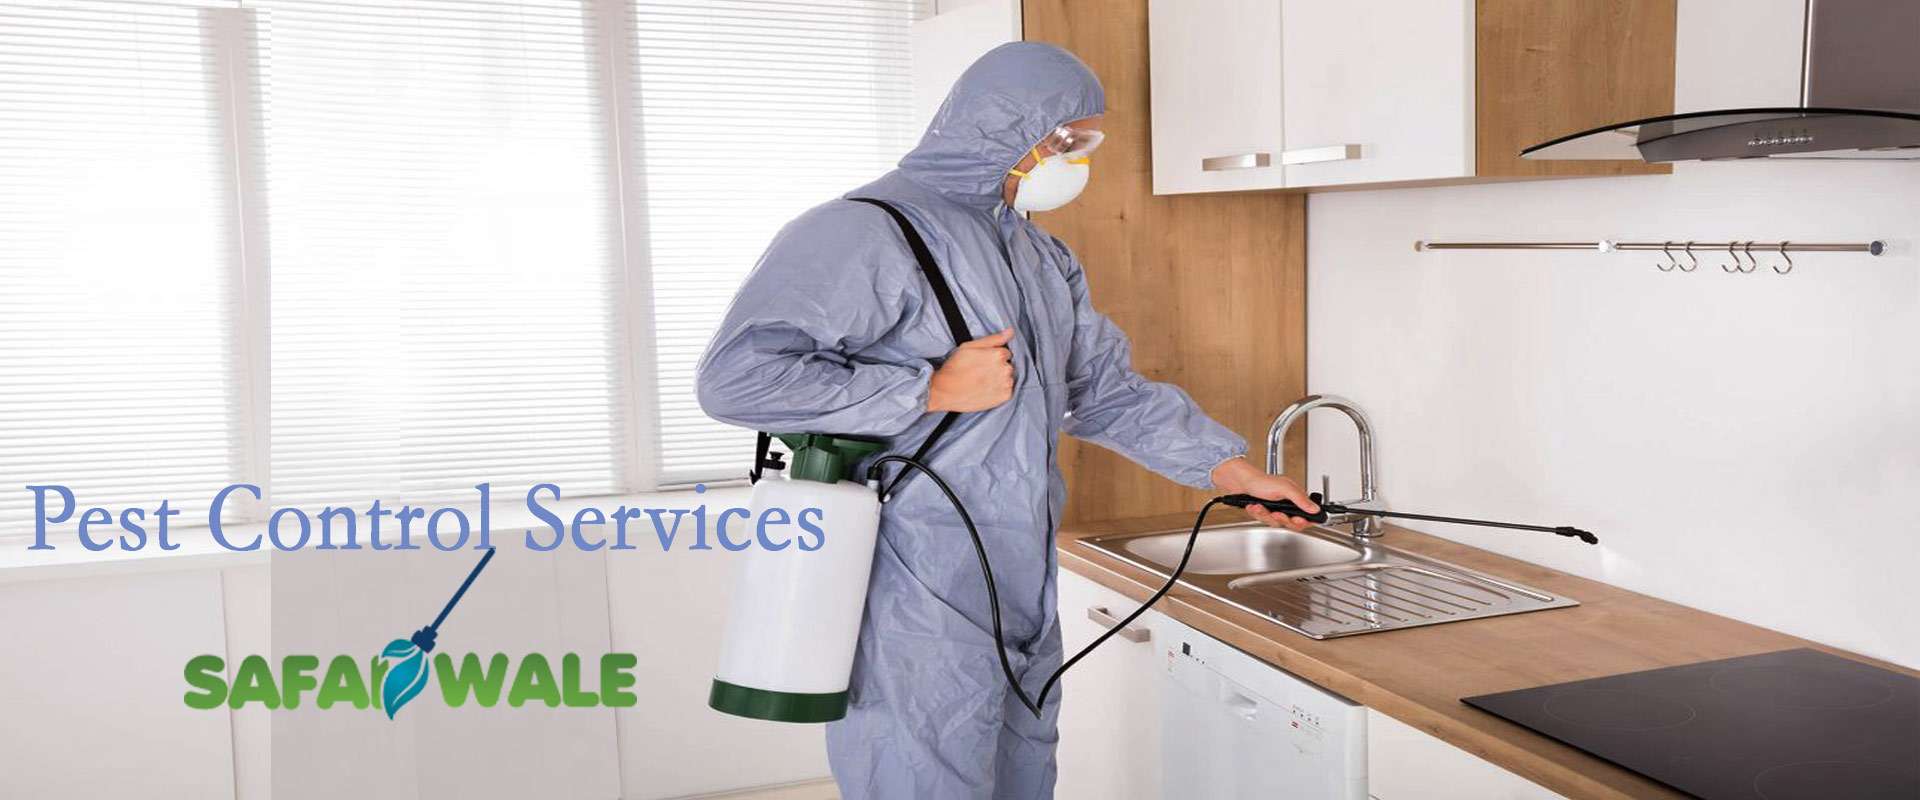 Pest Control Services In Panch Pakhadi, Thane